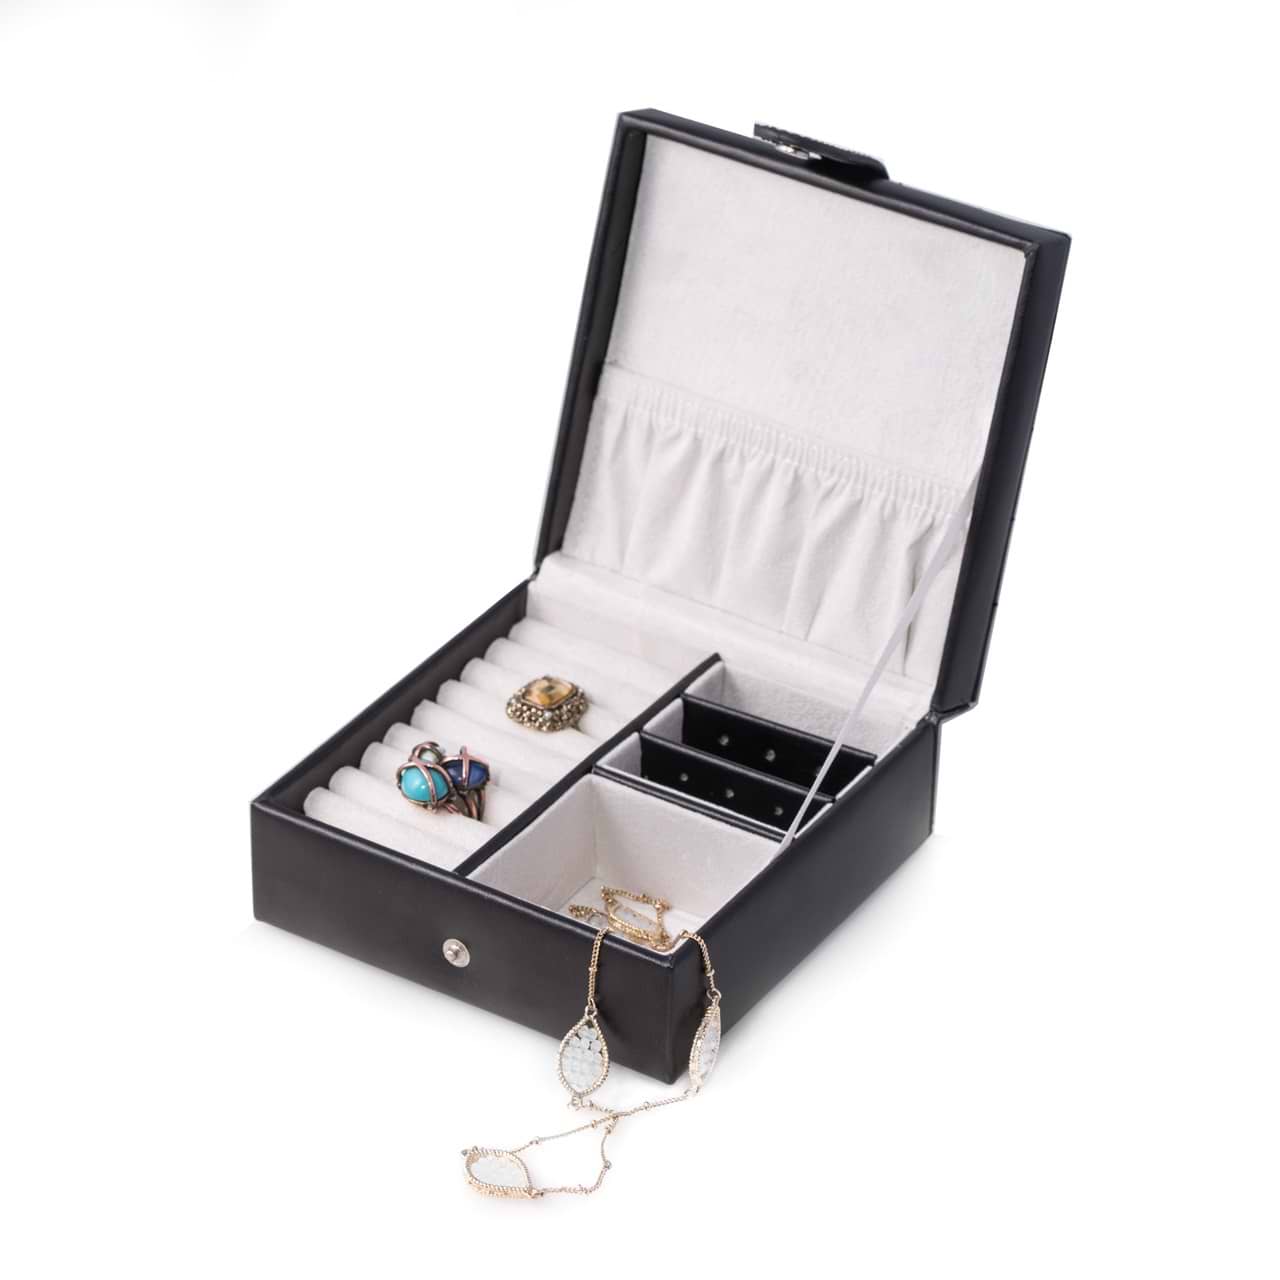 Black Leather Jewelry Box w/ Slots for Rings, Earrings and Compartment